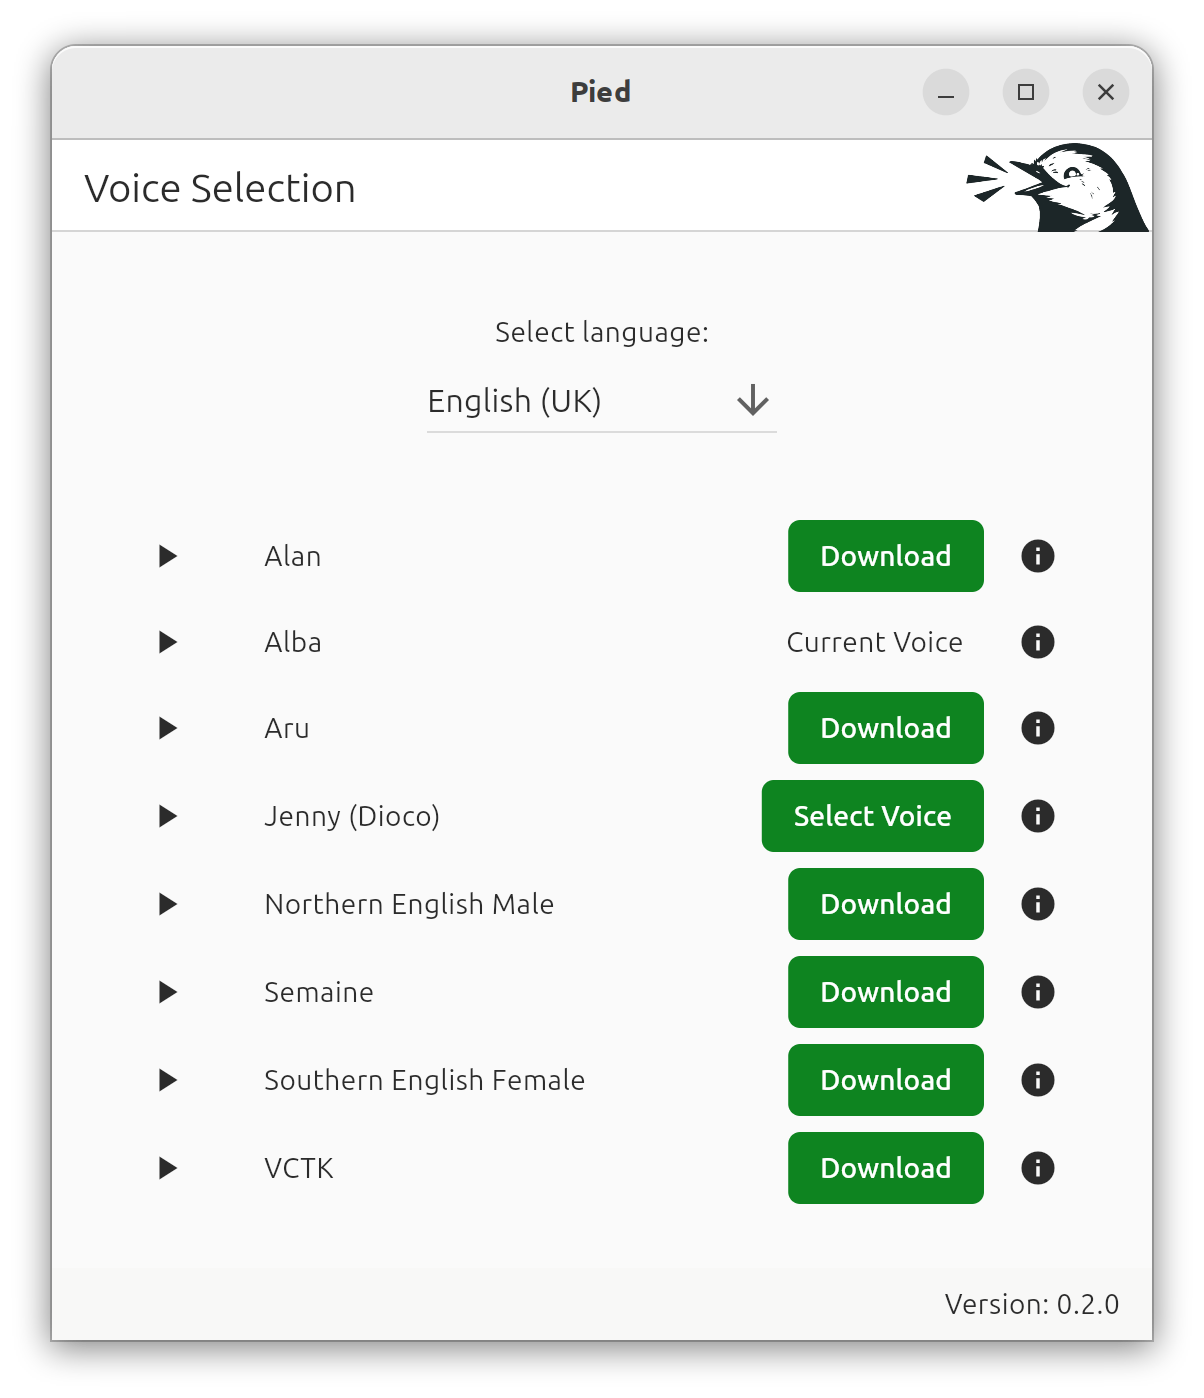 A screenshot showing the voice selection page in Pied